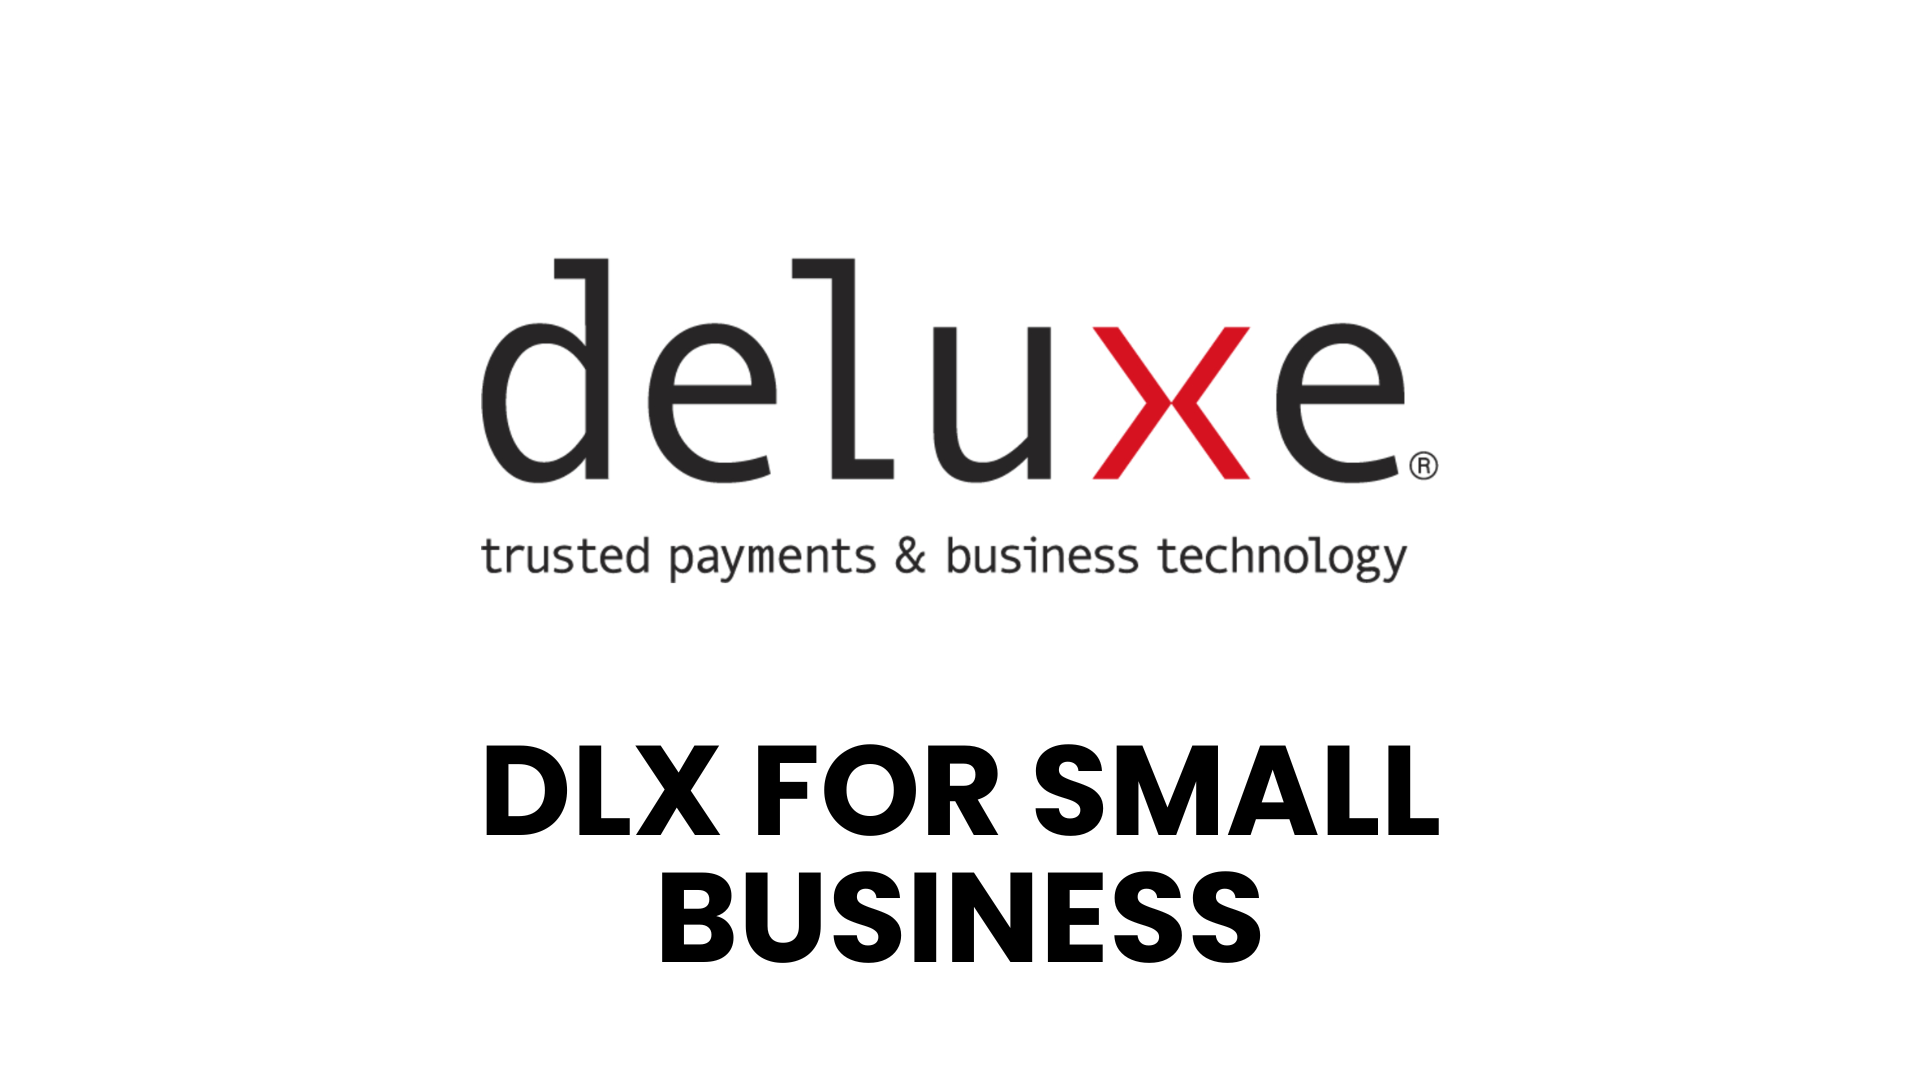 What Is DLX For Small Business? What Features Make DLX Suitable?